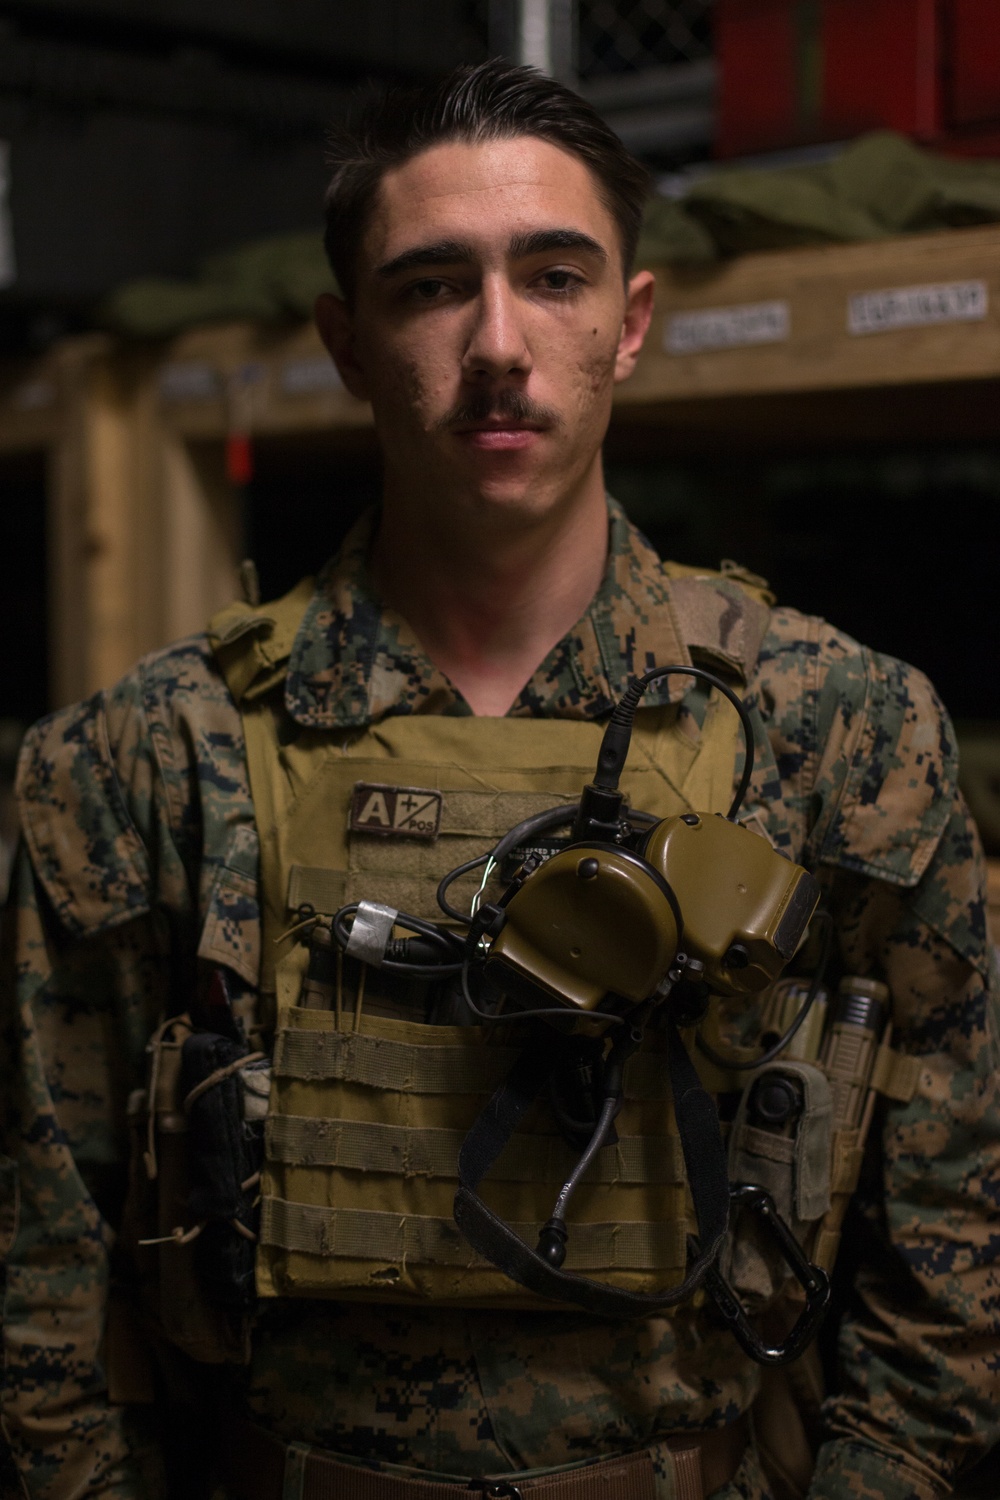 Meet our MEF | 5th ANGLICO Marine talks about working with foreign militaries